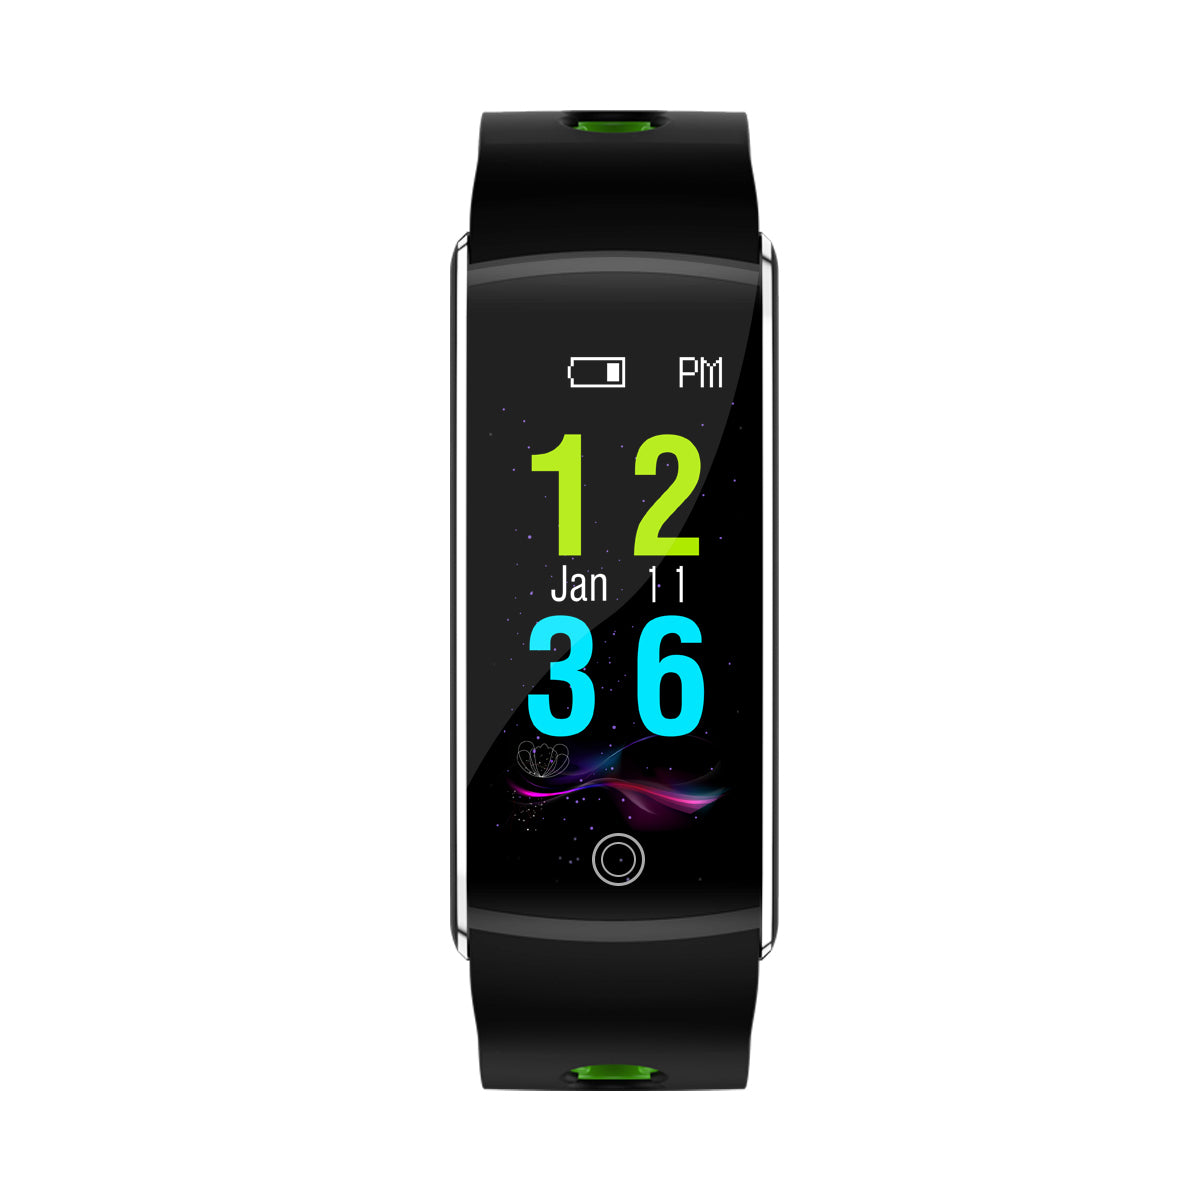 Bakeey F10 0.96OLED Color Screen Heart Rate Monitor IP68 Fitness Tracker Smart Bracelet